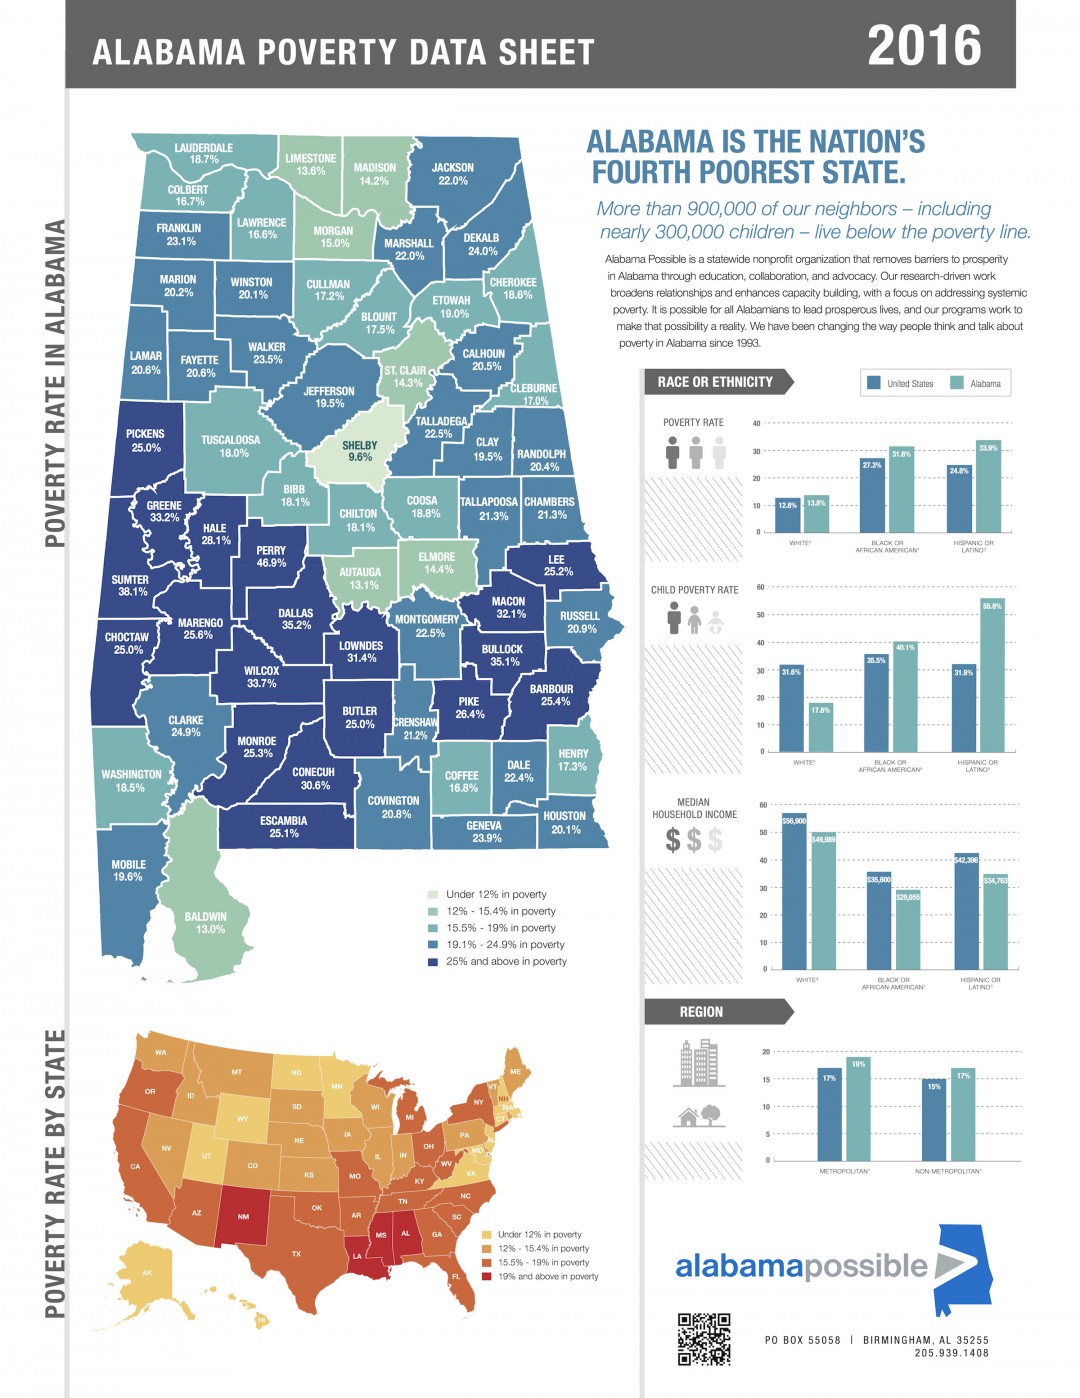 More than 900,000 Alabamians live in poverty Alabama Possible